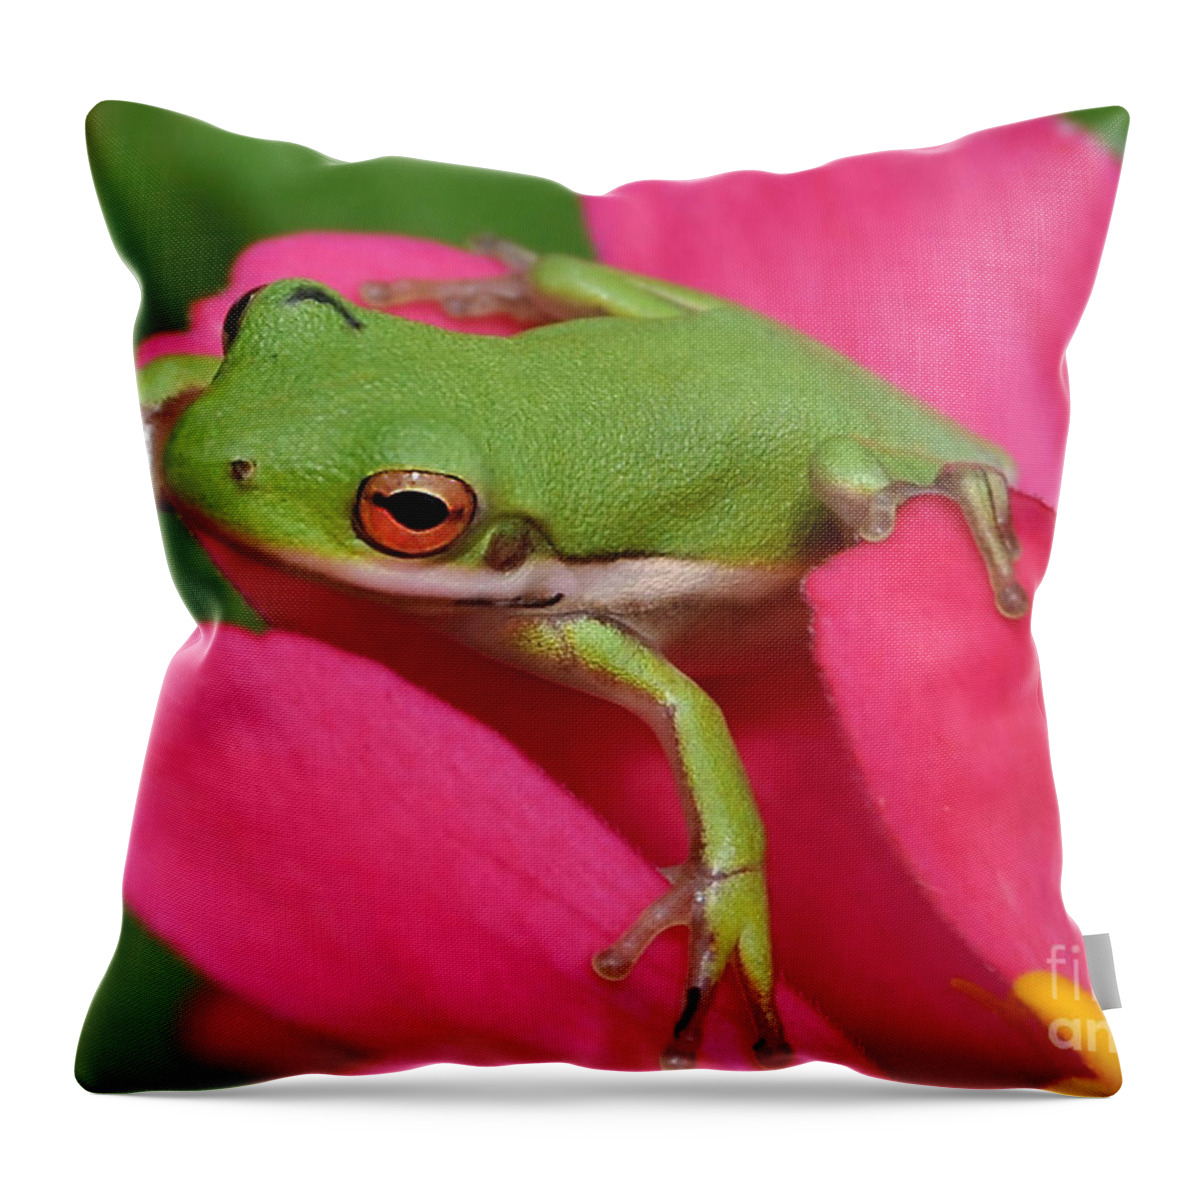 Frog Throw Pillow featuring the photograph Tree Frog On A Pink Flower by Kathy Baccari